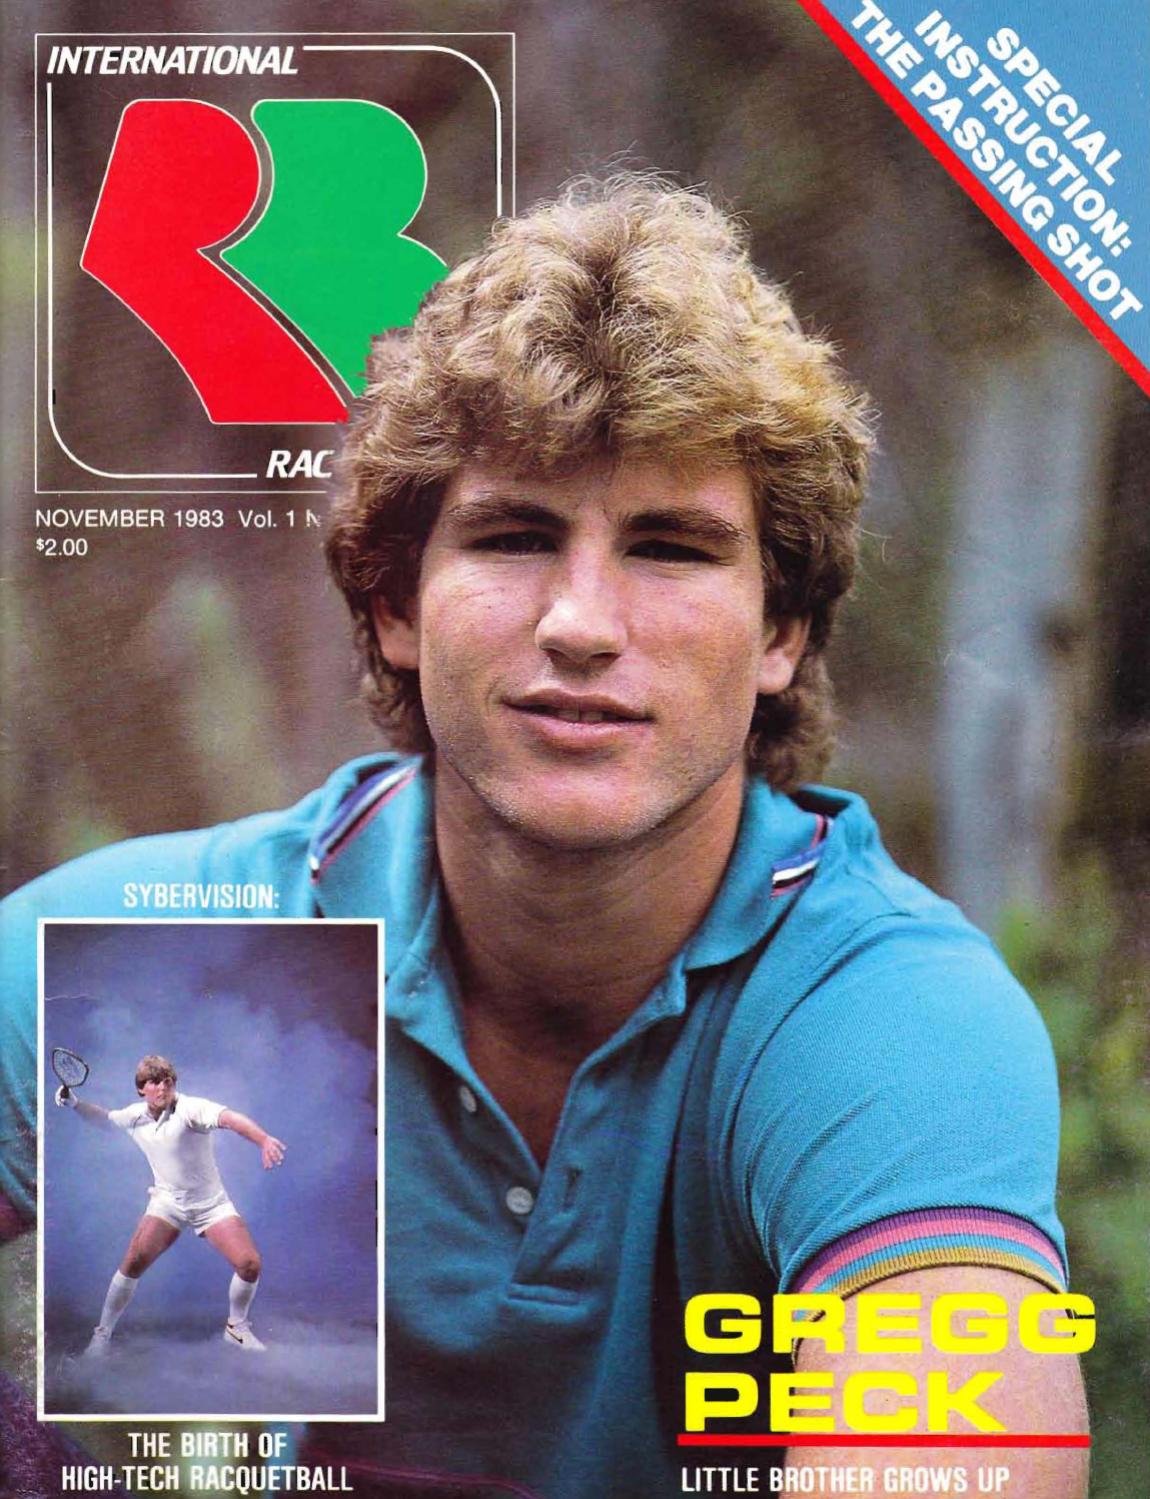 International Racquetball Nov 1983 cover, photographer unknown